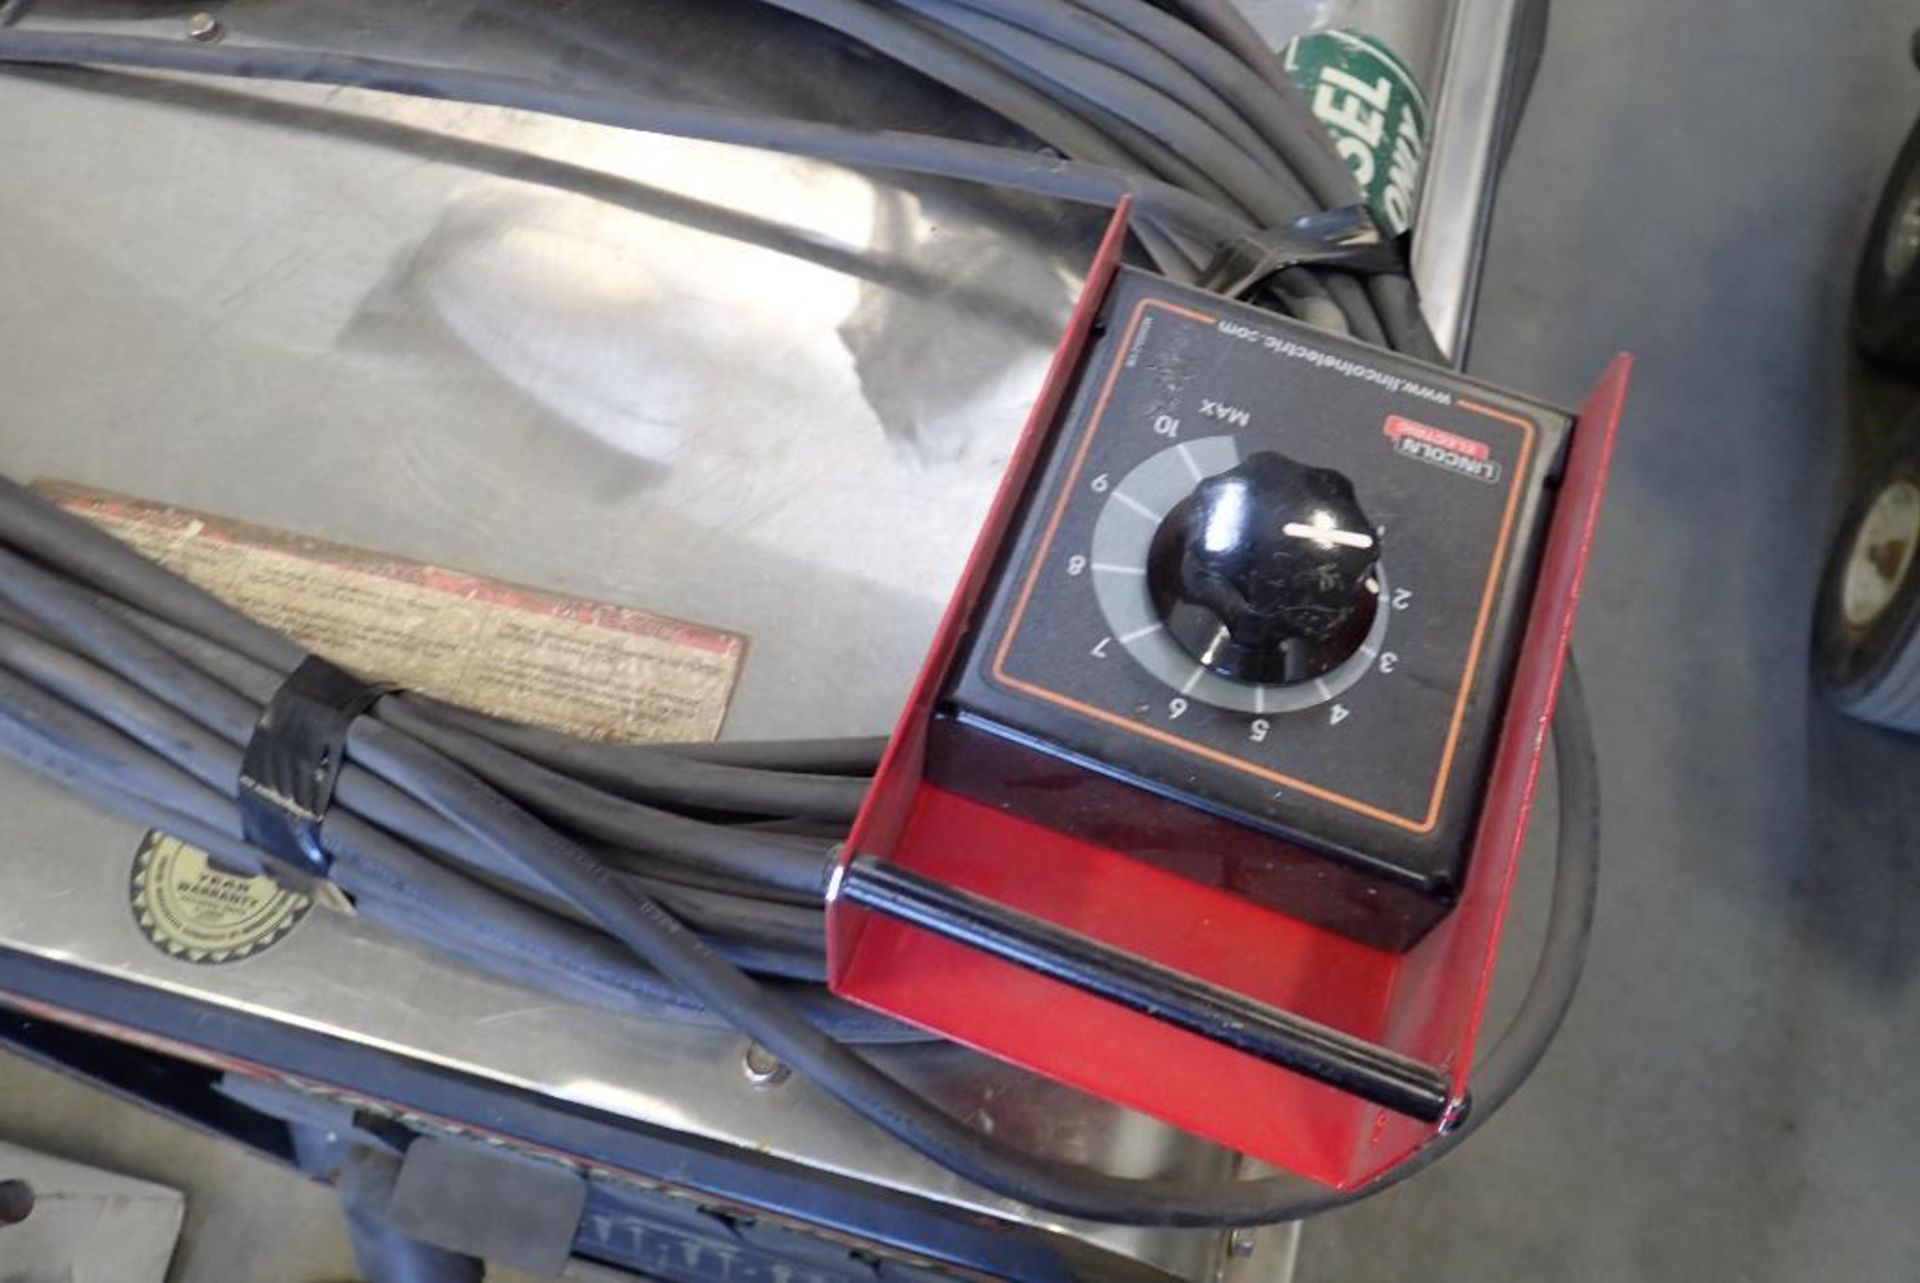 2007 Lincoln Electric Vantage 300 Diesel Portable Welder w/ Remote, Showing 2,079hrs SN U1070908955. - Image 6 of 8